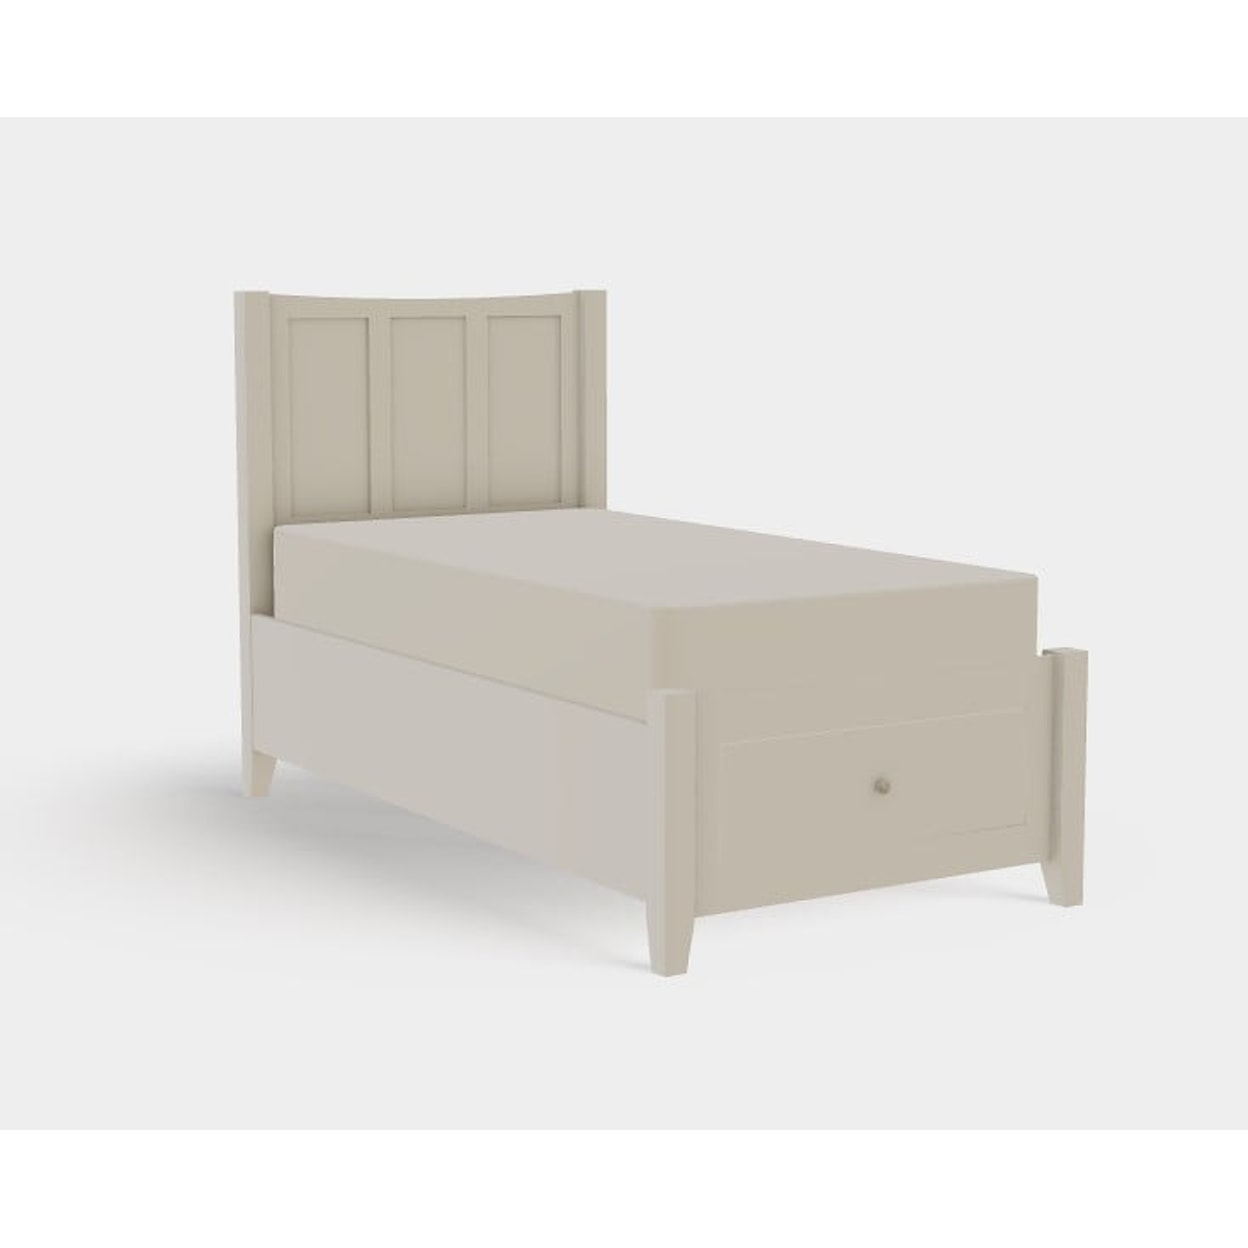 Mavin Atwood Group Atwood Twin XL Footboard Storage Panel Bed